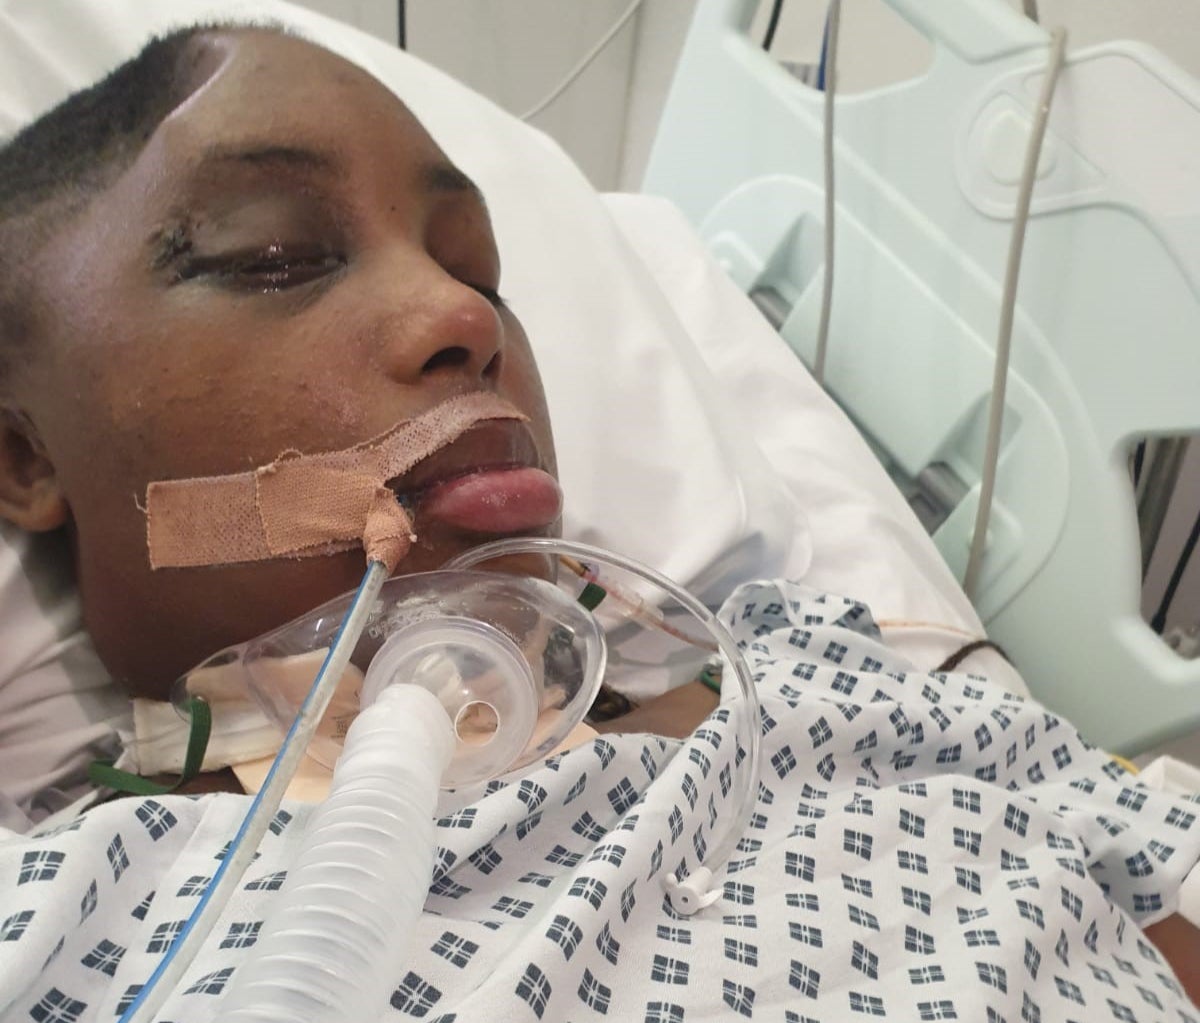 Sasha Johnson remains in hospital more than nine months after the attack with permanent injuries.